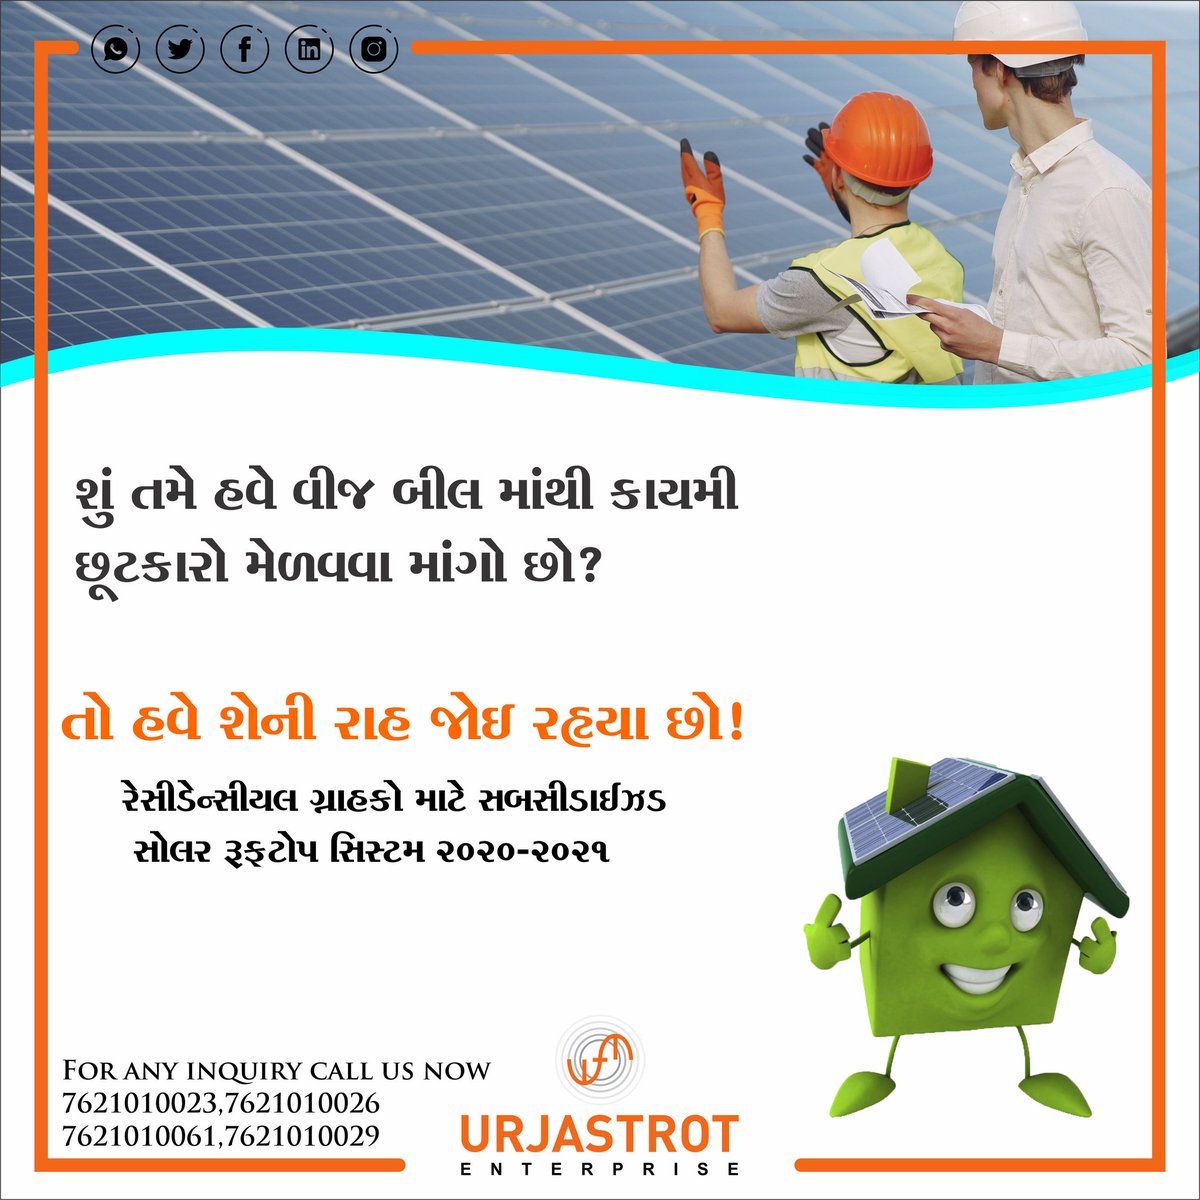 URJASTROT ENTERPRISE
FOR THE NATION WITH THE NATION
For any further information you can call us 
+91 7621010012,  +91 7621010065
#urjastrotenterprise #urjastrot #solarpower #gogreen #solarsubsidy #gosolar #solarenergy #solarpanelinstaller
PRE BOOK YOUR SOLAR SYSTEM NOW